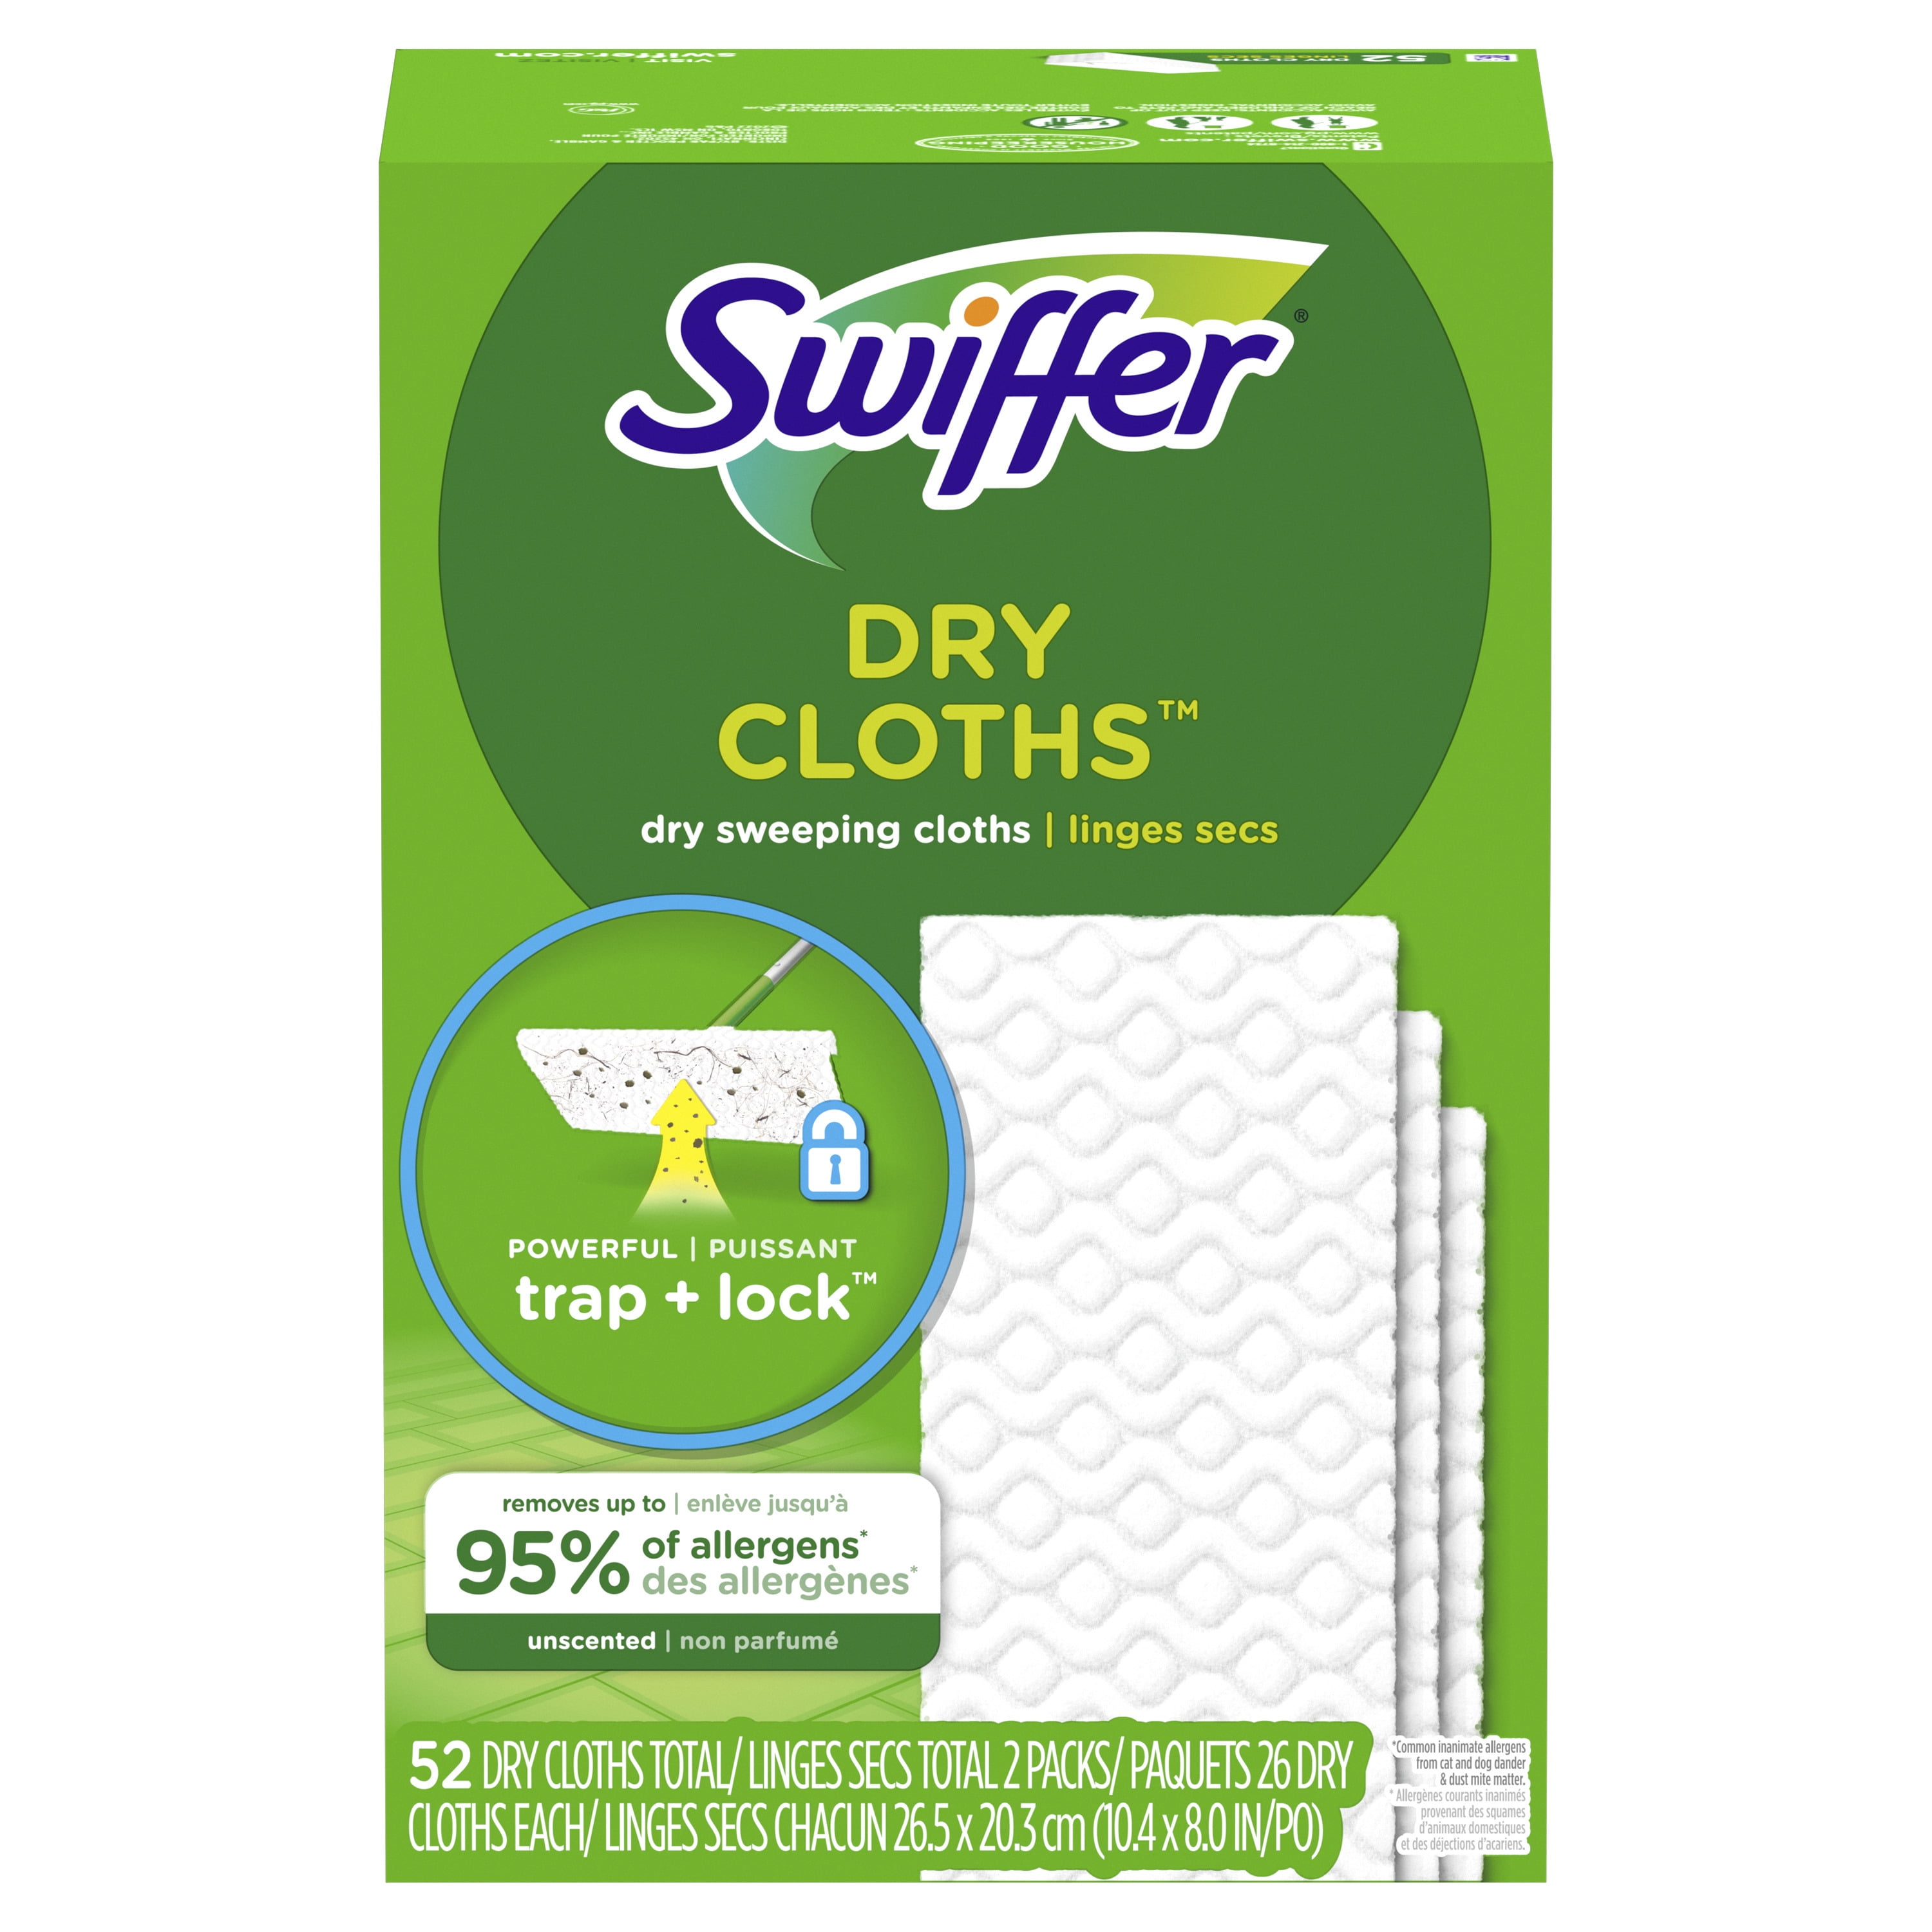 Swiffer Sweeper X-Large Dry Sweeping Cloths Unscented Cellulose  Fiber/Polypropylene Refill (16-Pack)